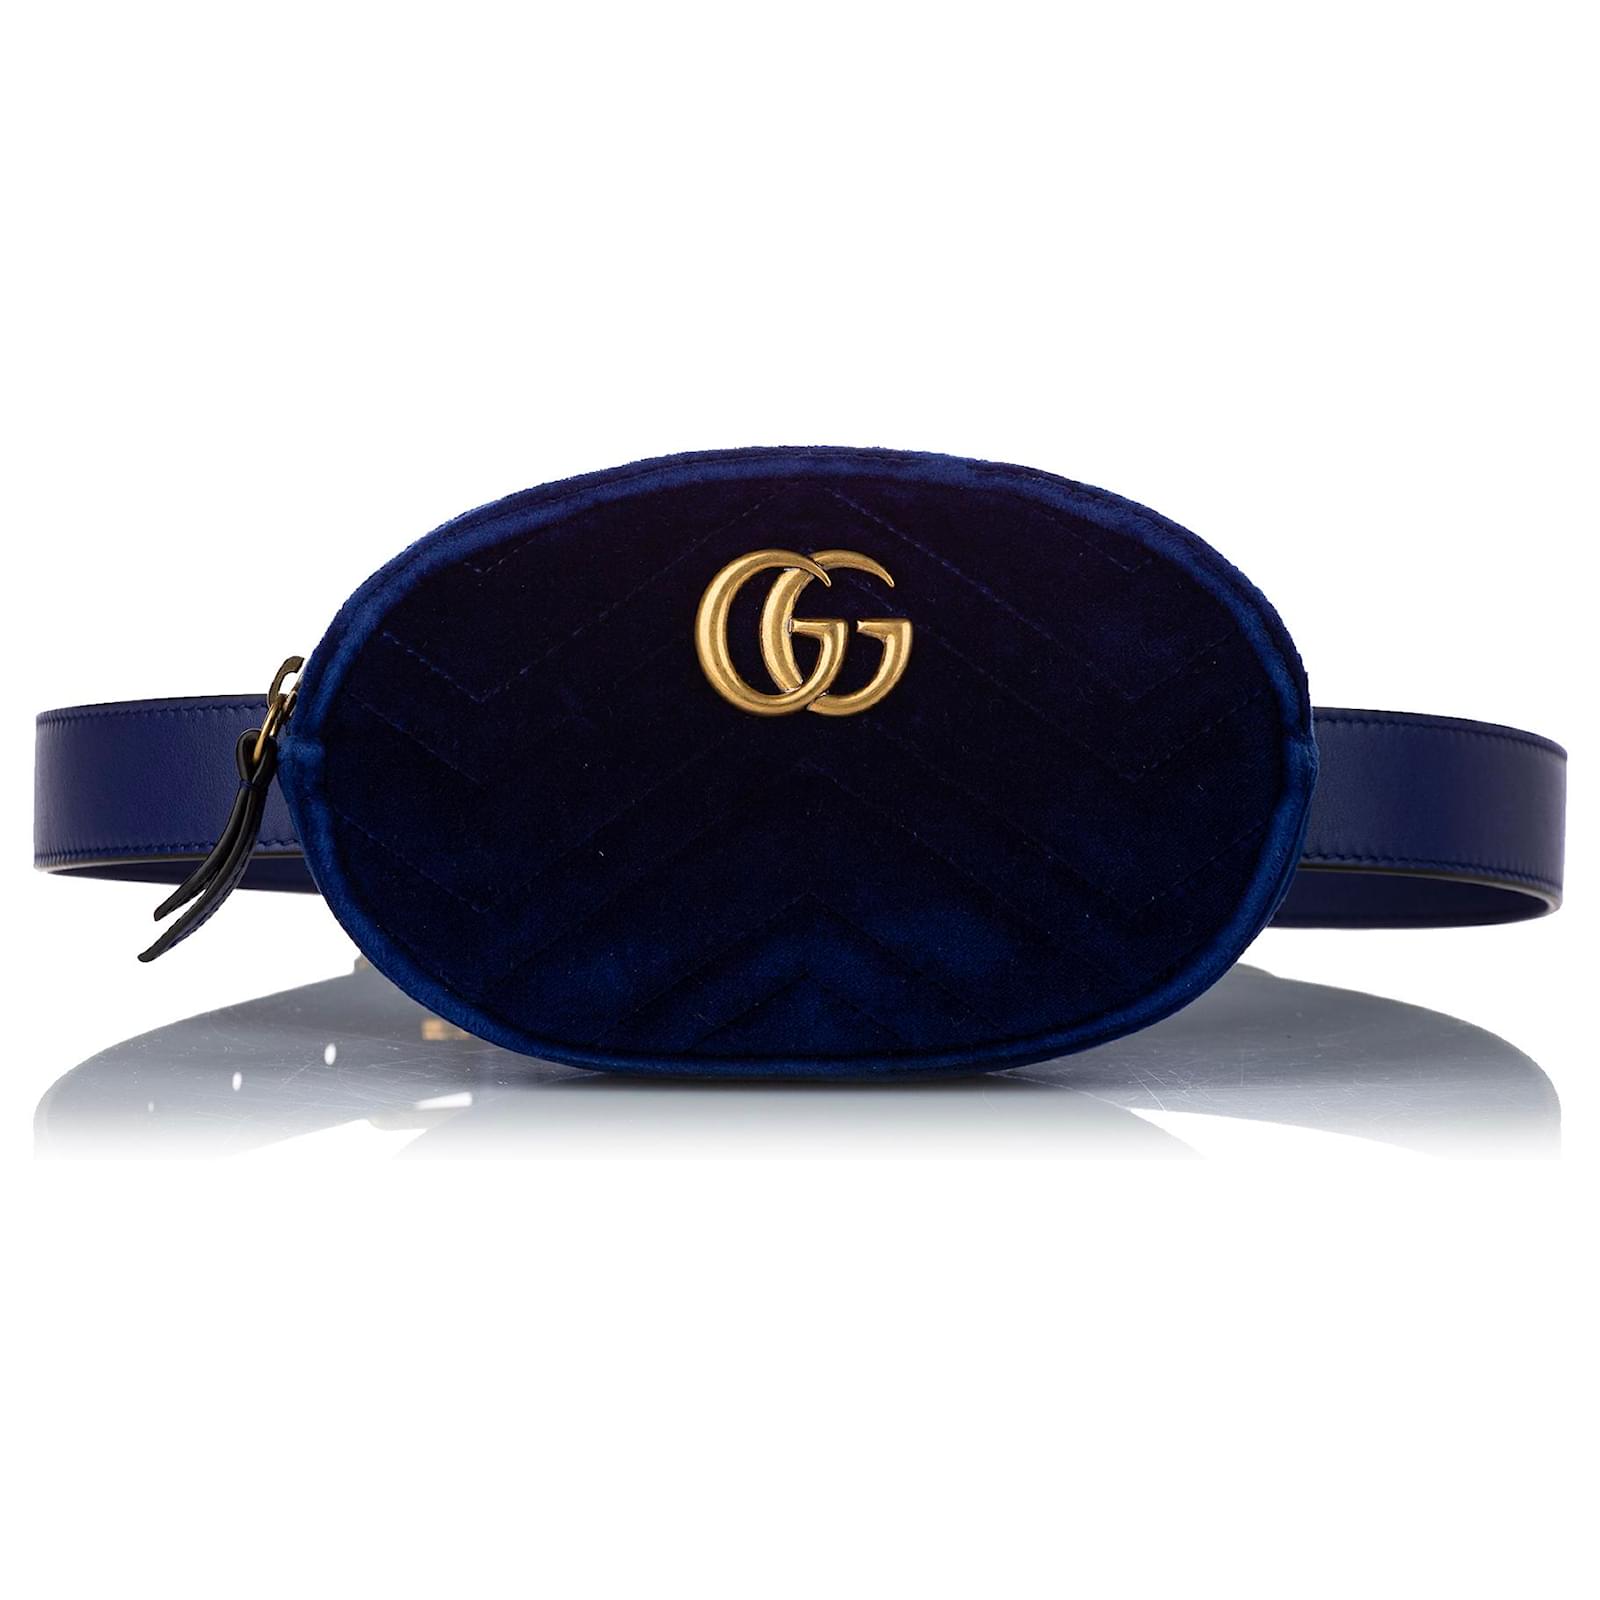 Gucci Red GG Marmont Matelasse Leather Belt Bag Pony-style